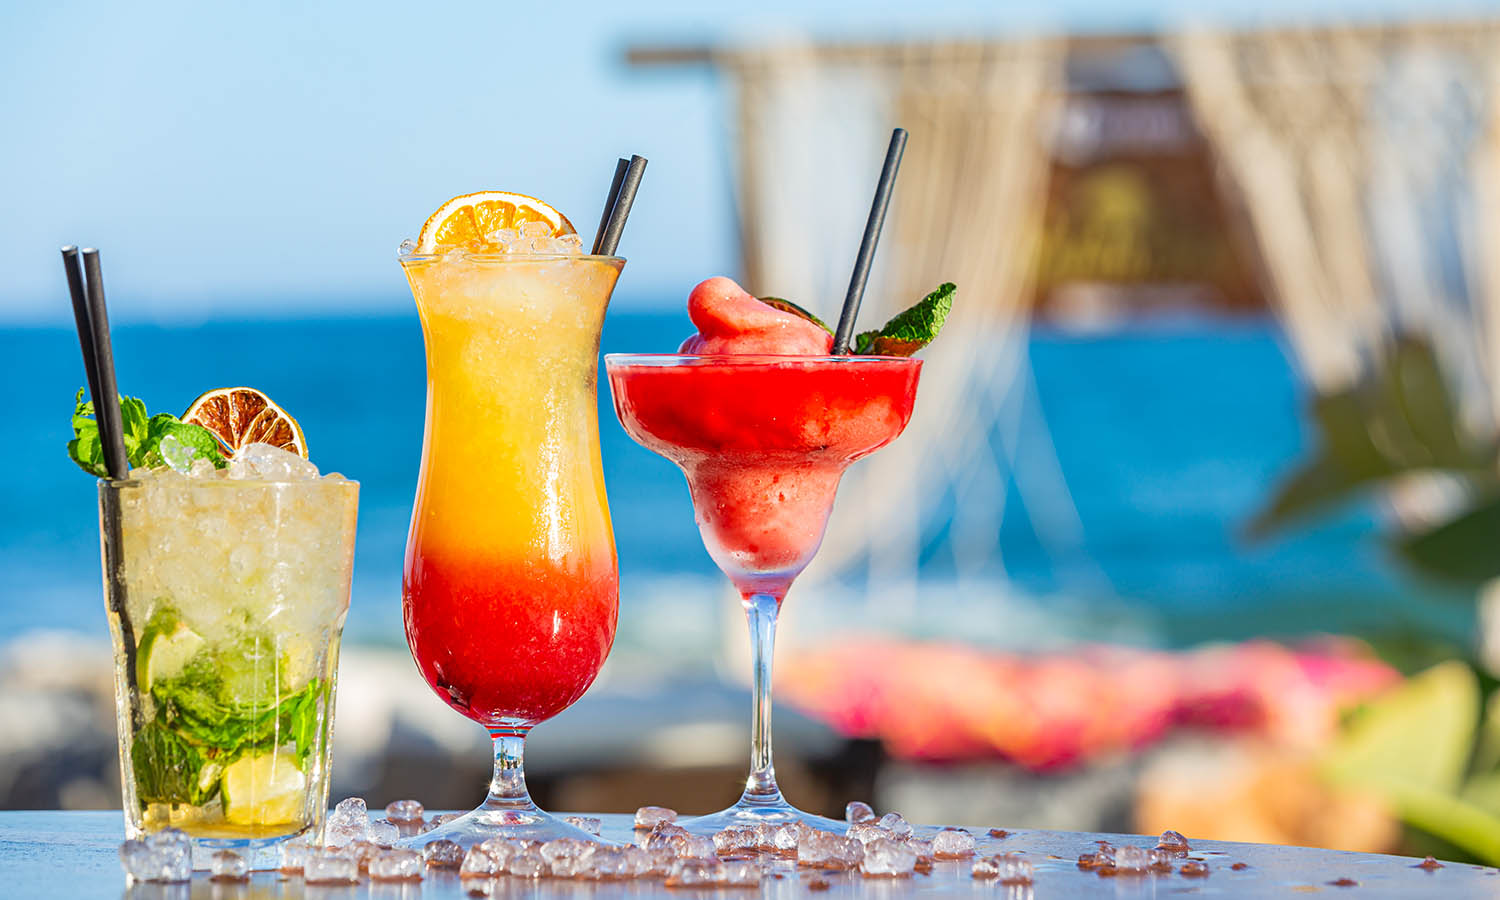 Enjoy the best cocktails on the Costa del Sol!